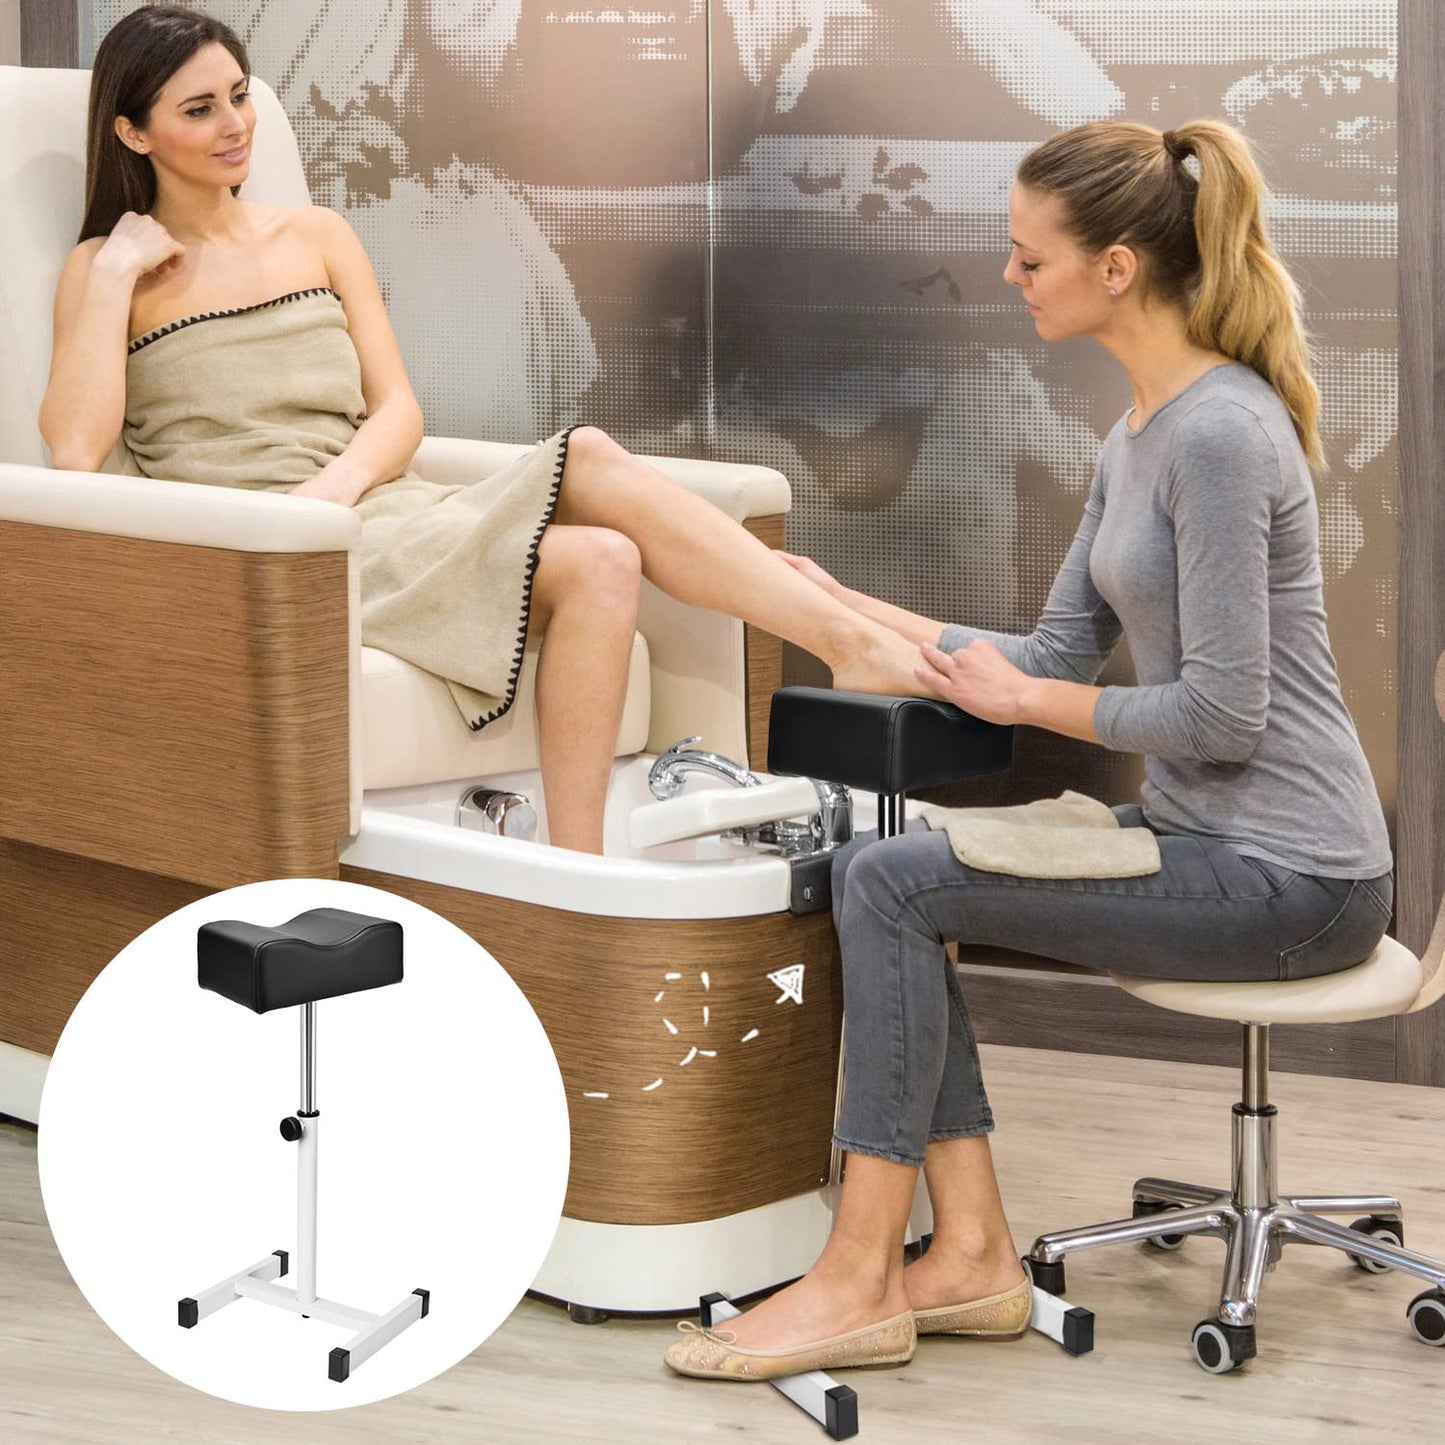 Pedicure Manicure Footrest, Foot Massage Manicure Nail Beauty Stool Stand, Adjustable Height Footstool for Home Beauty Salon Spa Tattoo (Black)